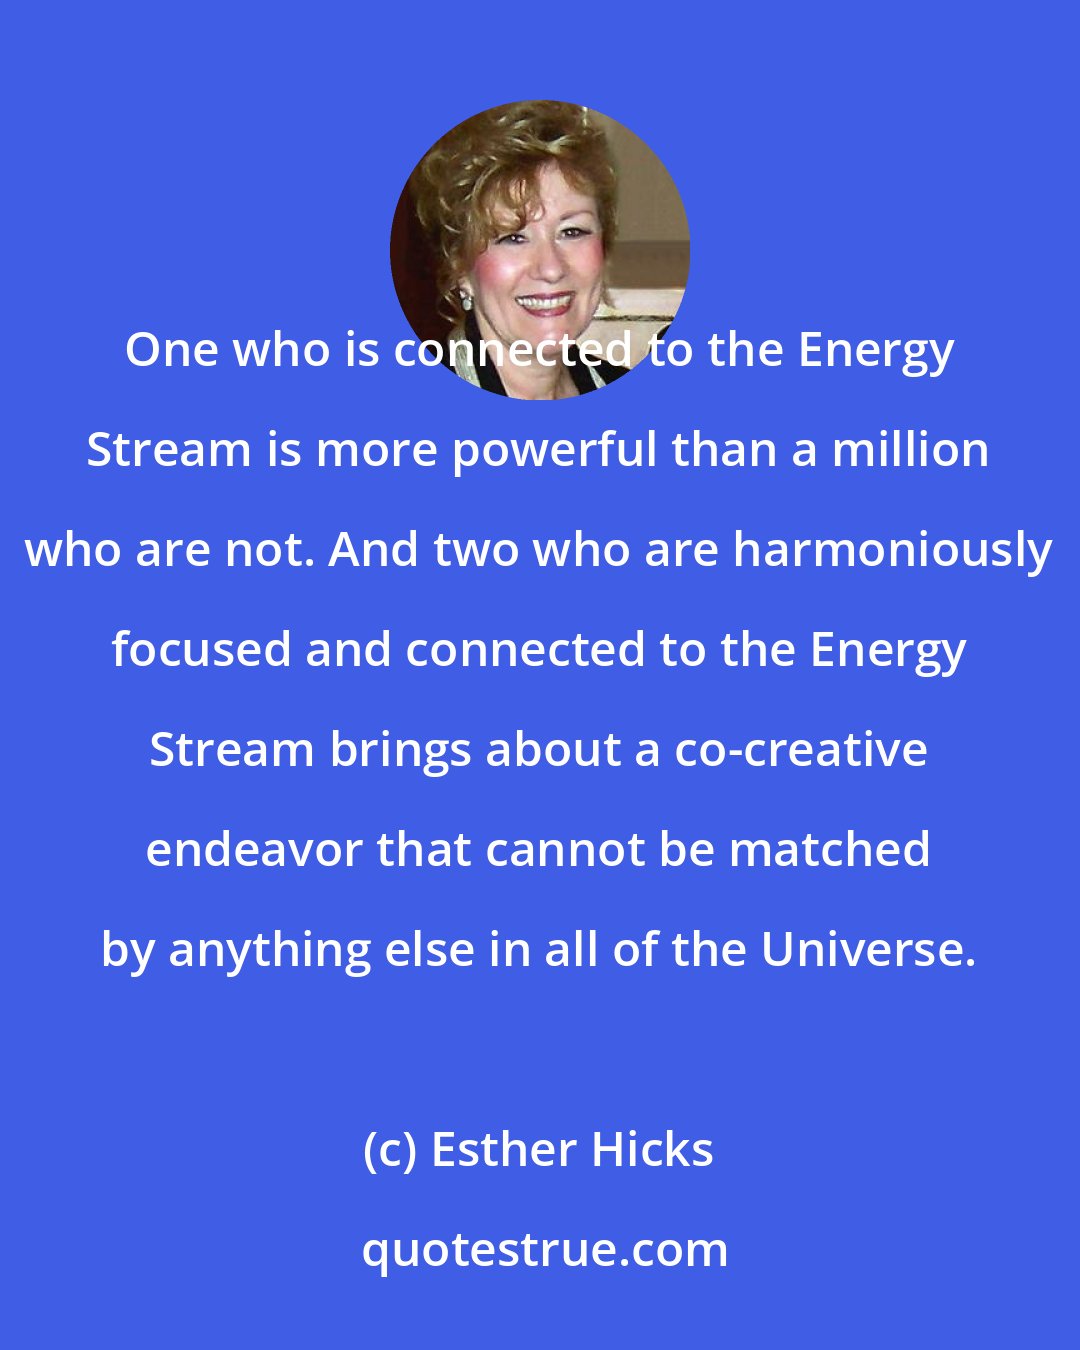 Esther Hicks: One who is connected to the Energy Stream is more powerful than a million who are not. And two who are harmoniously focused and connected to the Energy Stream brings about a co-creative endeavor that cannot be matched by anything else in all of the Universe.